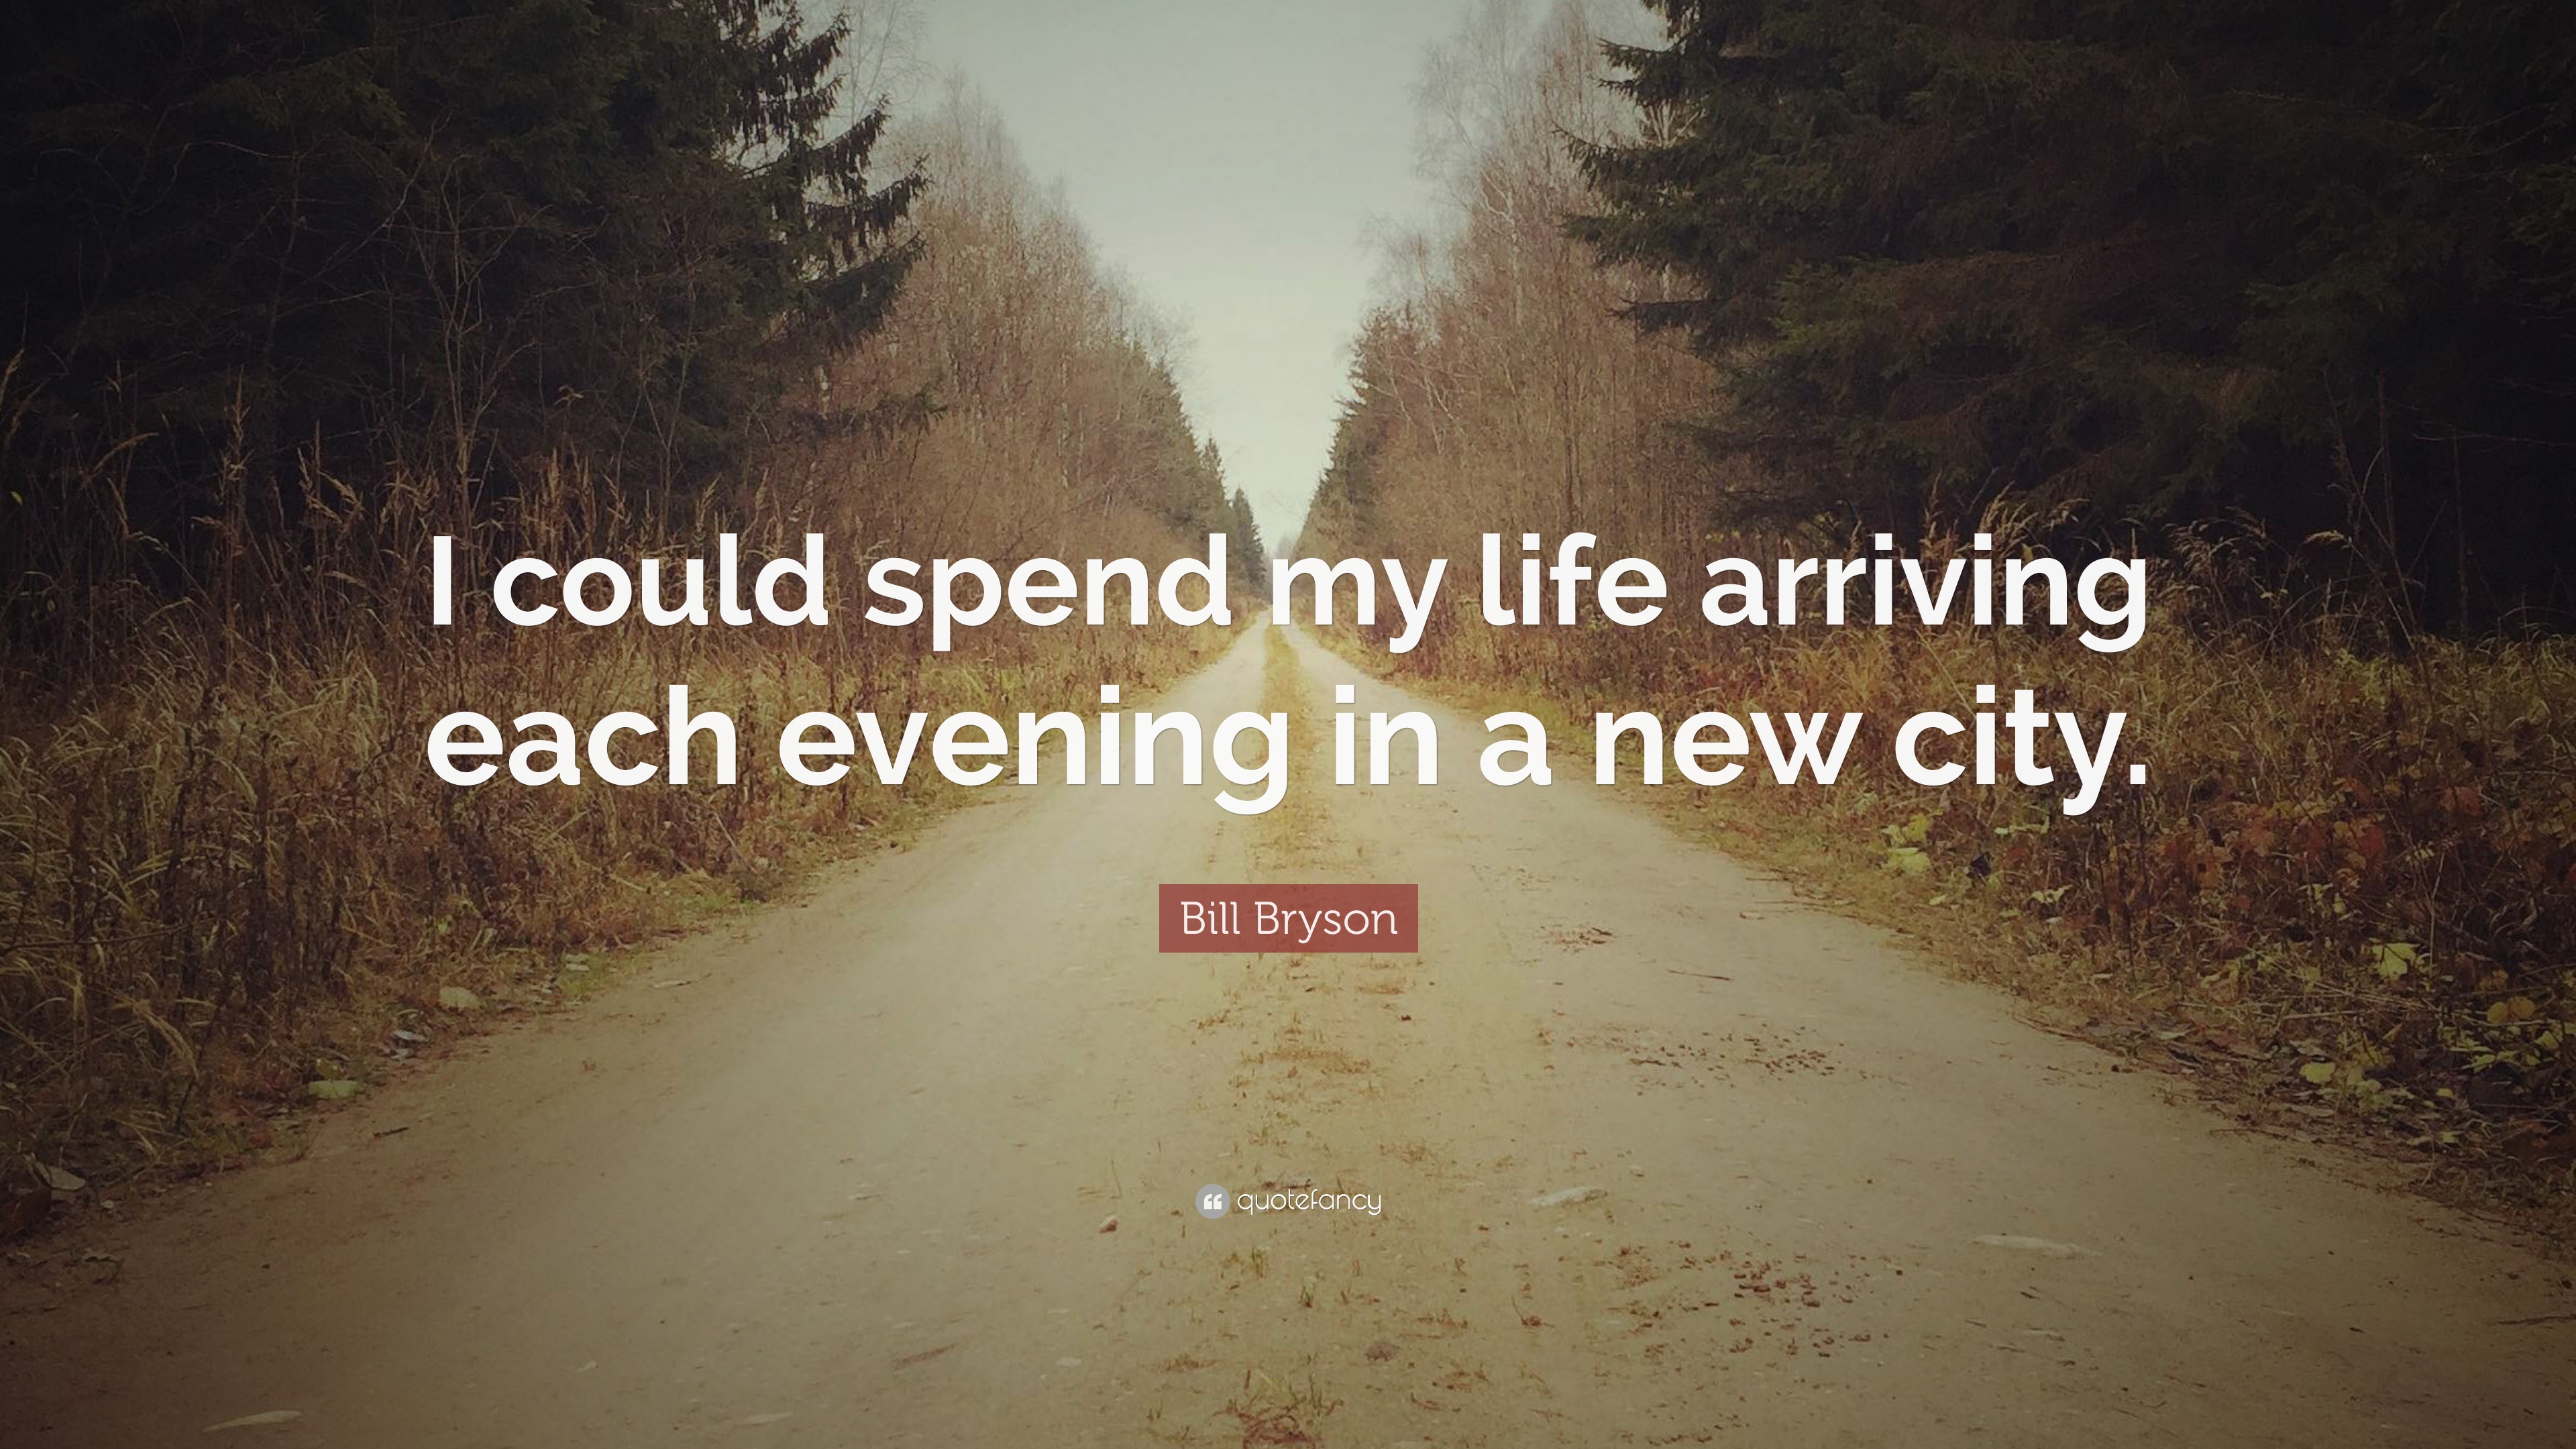 Bill Bryson Quote: “I could spend my life arriving each evening in a ...